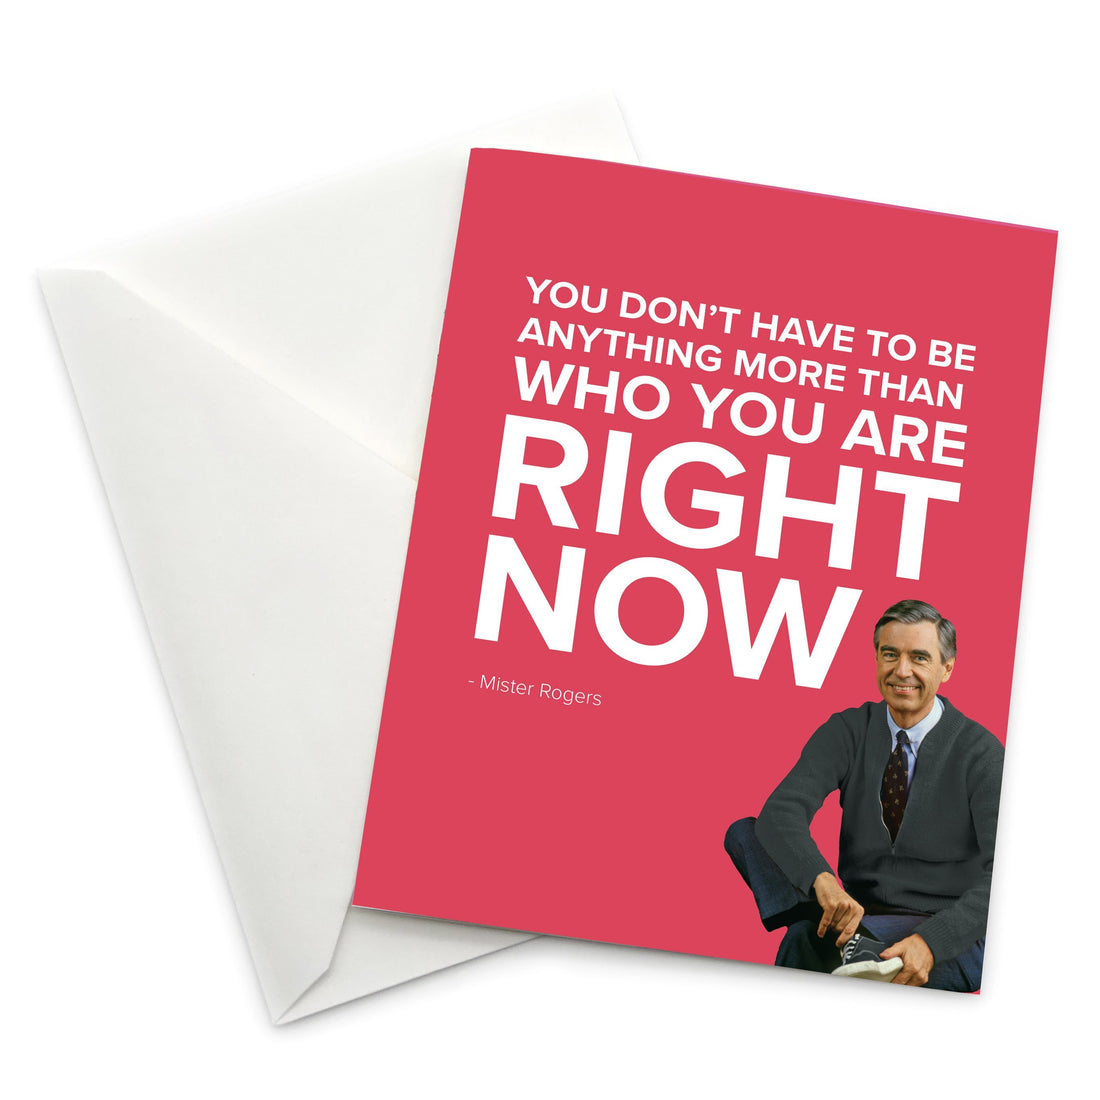 Mister Rogers Greeting Card: You Don't Have to Be Anything More...